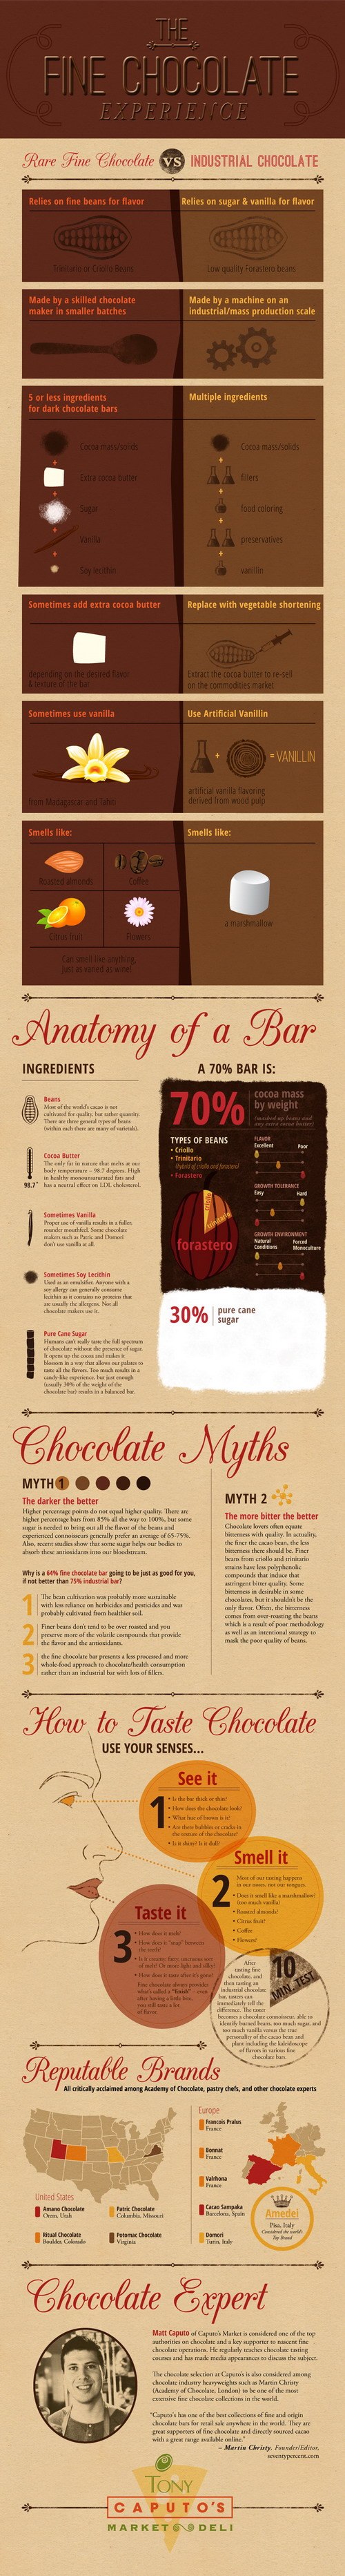 Fine-Chocolate-Experience-Infographic-500